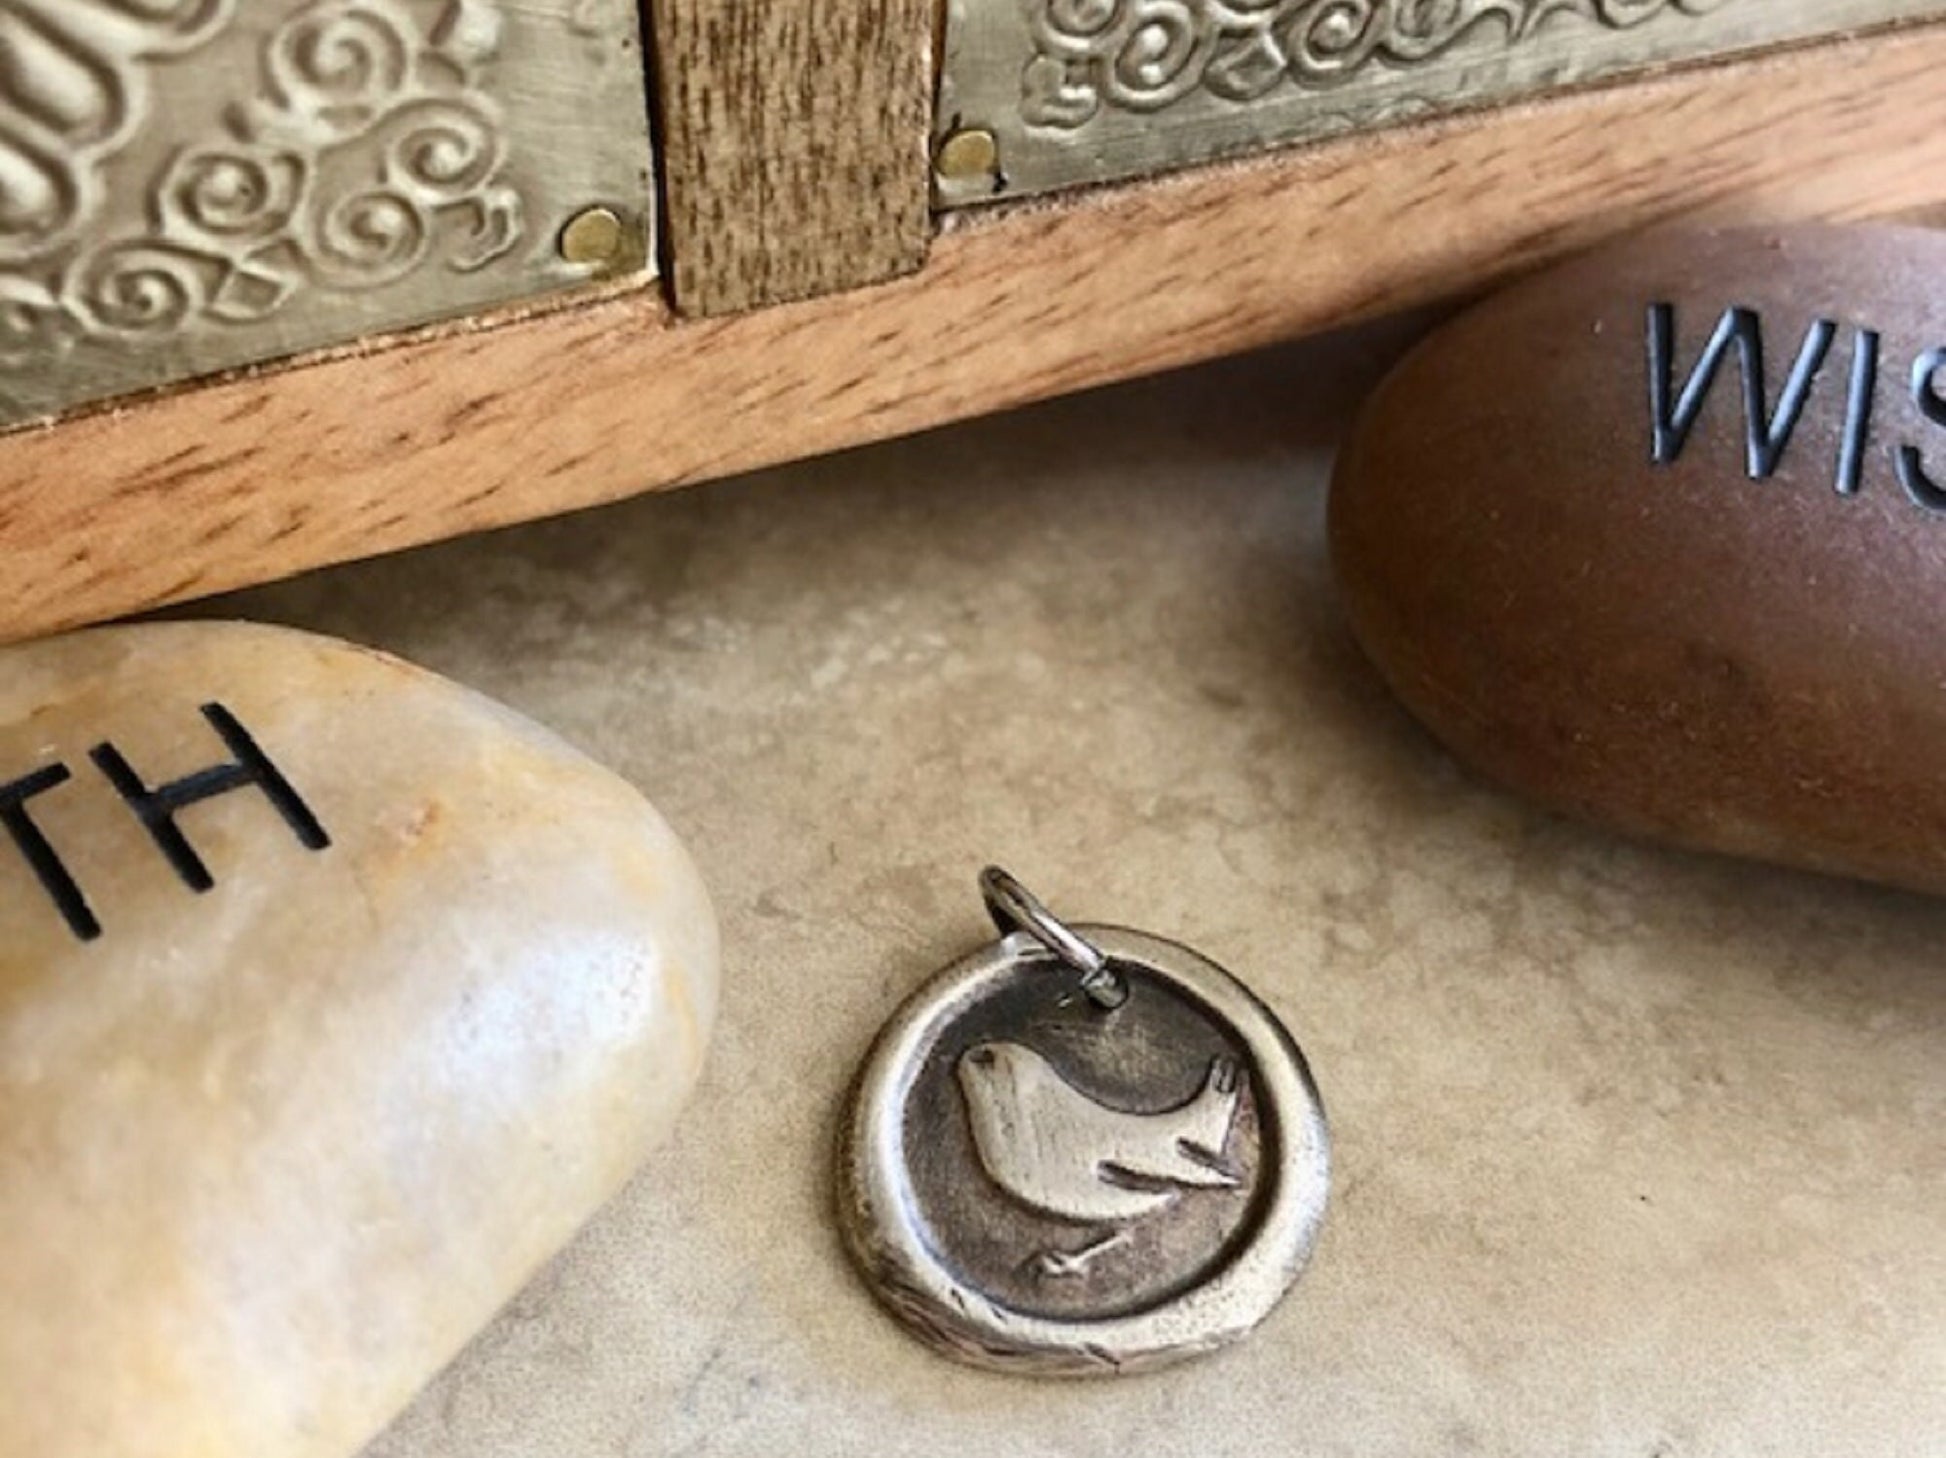 Silver Wren Pendant Necklace - A symbol of Strength, Will Power, Determination, Never Give Up, Success - Made From An Antique Wax Seal, 116